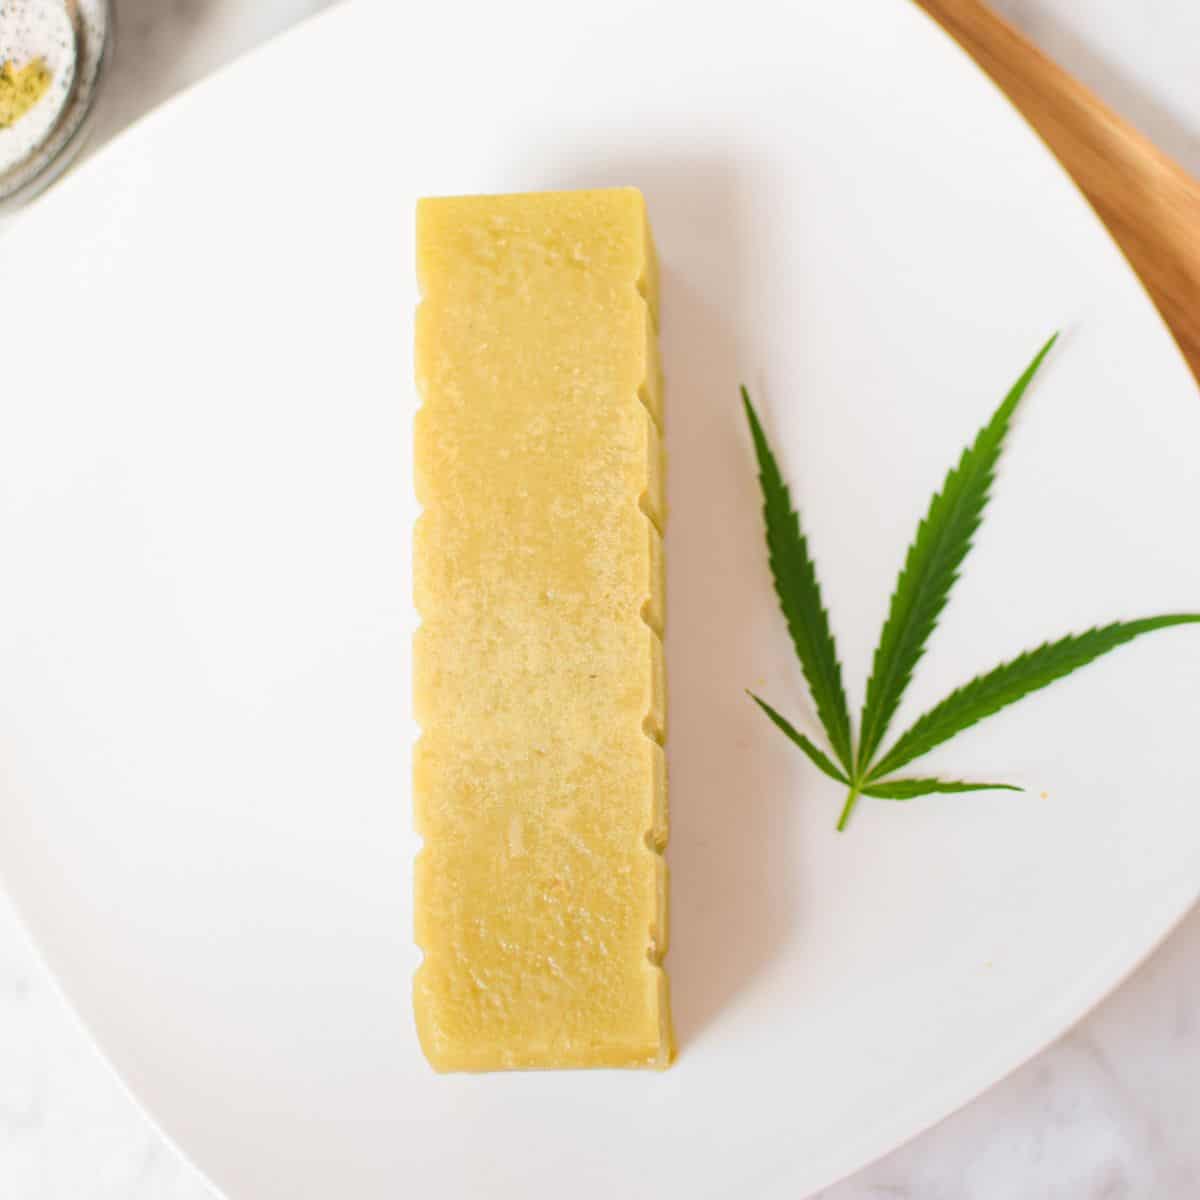 https://emilykylenutrition.com/wp-content/uploads/2022/12/How-to-Make-Stovetop-Cannabutter-by-Emily-Kyle11.jpg